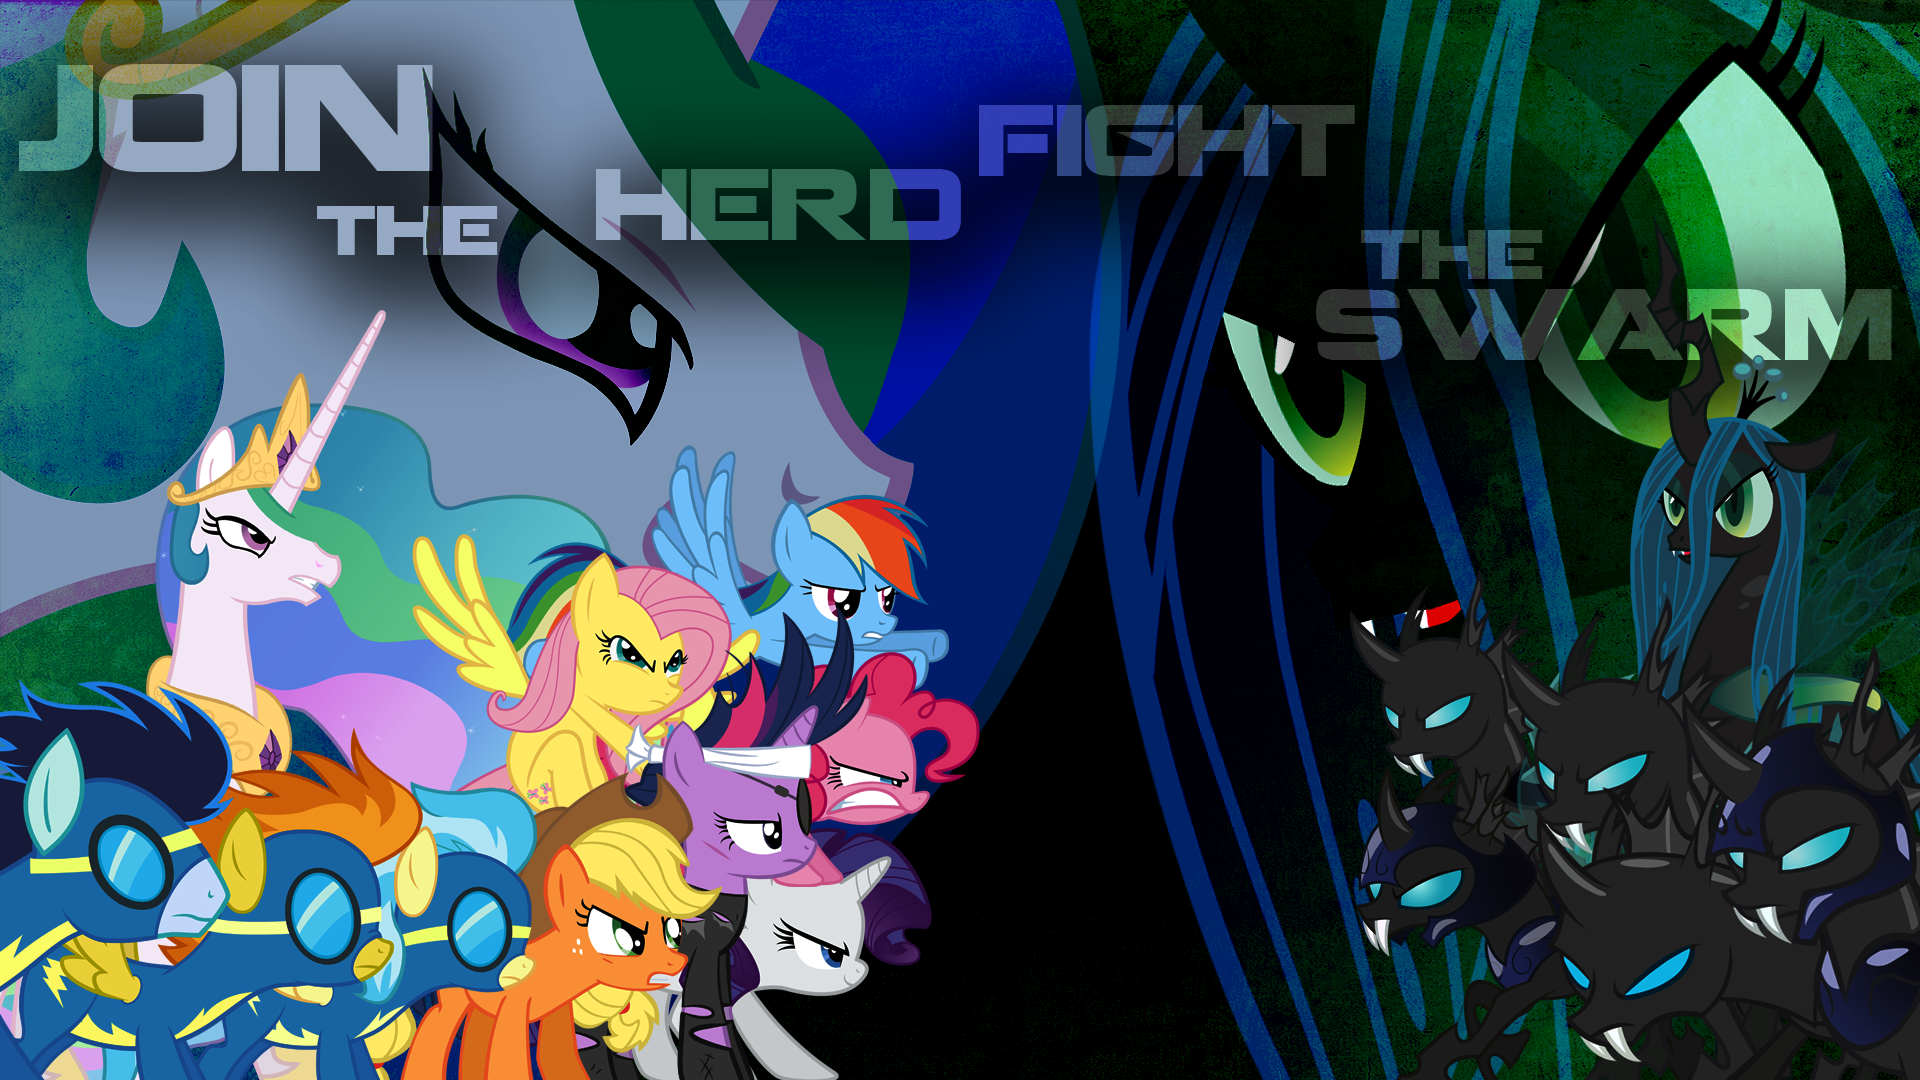 Join the Herd Fight the Swarm by Nothingall3n4